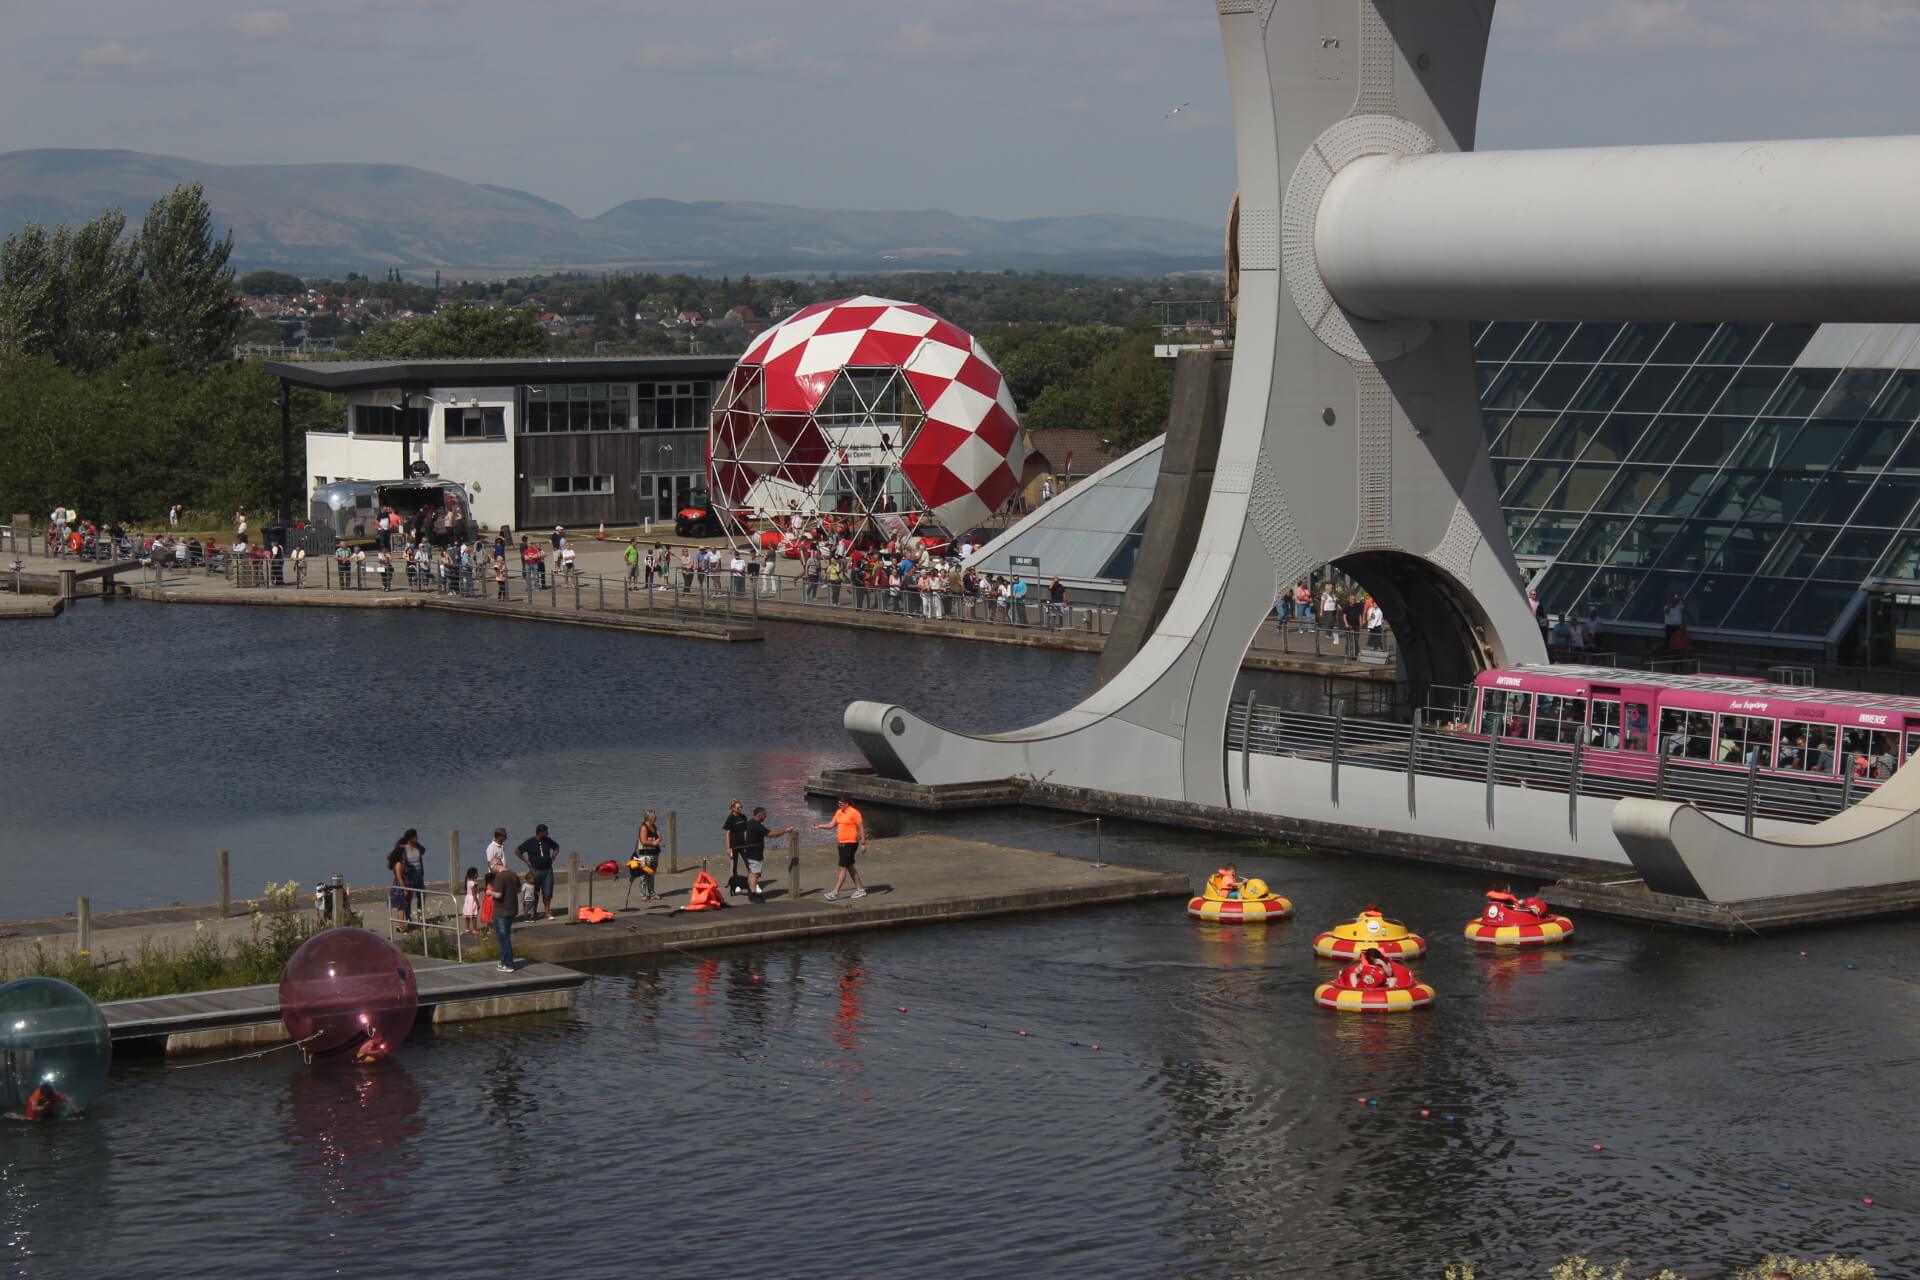   Falkirk Wheel   bubbleparc_Falkirk showcases the bungydome in its brightest red and white coat, performing in front of the awe inspiring and world famous Falkirk Wheel. &nbsp; 